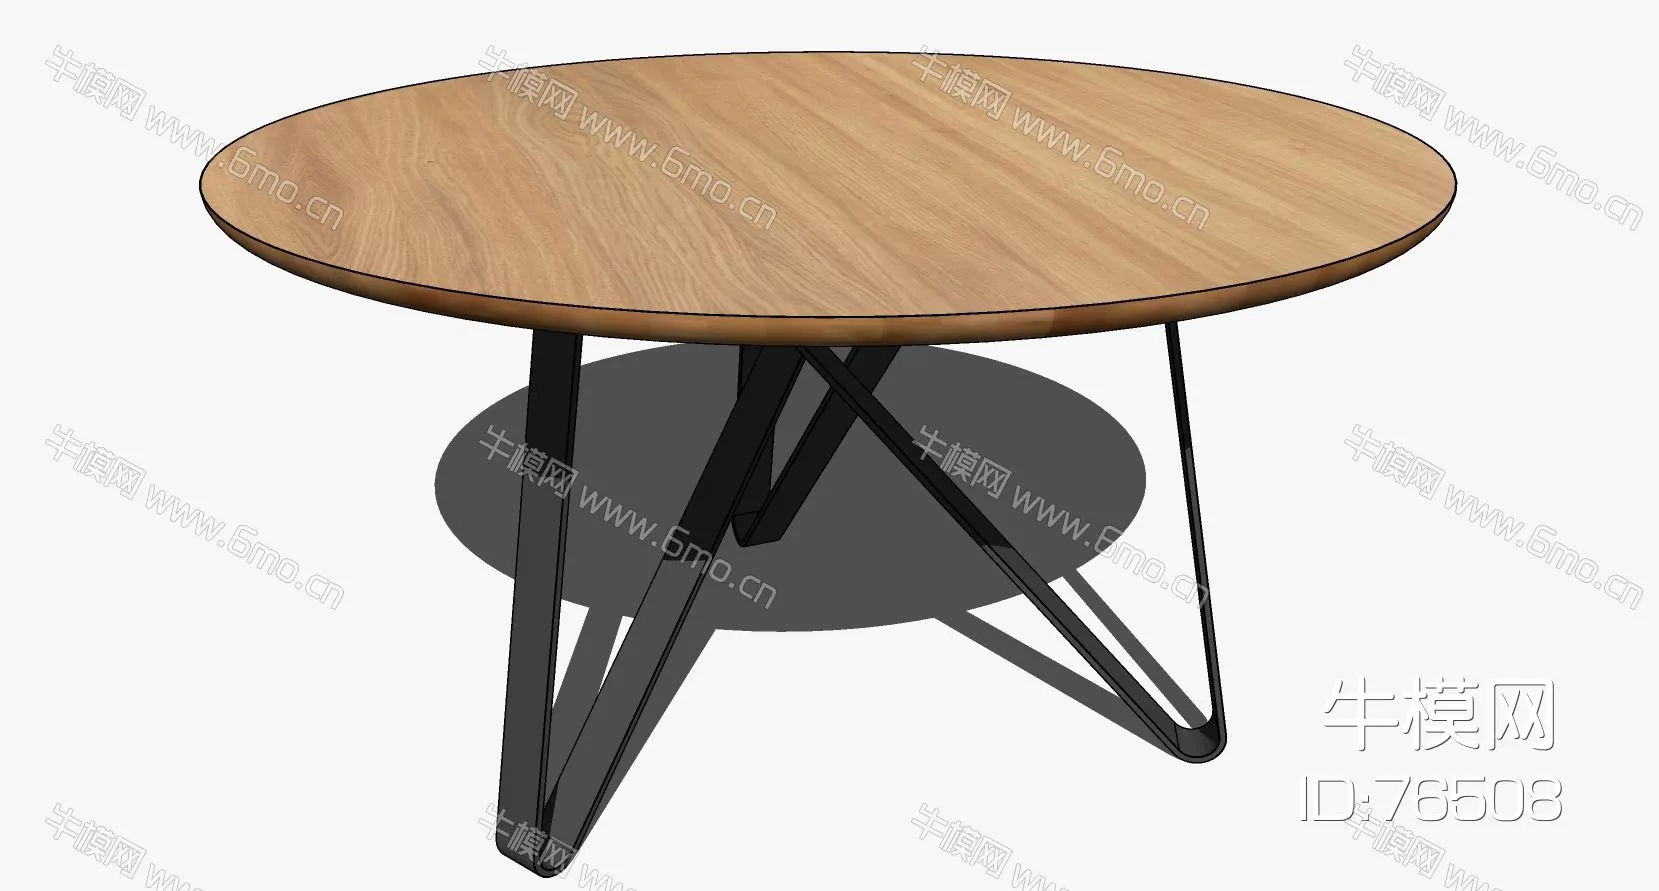 NORDIC COFFEE TABLE - SKETCHUP 3D MODEL - ENSCAPE - 76508